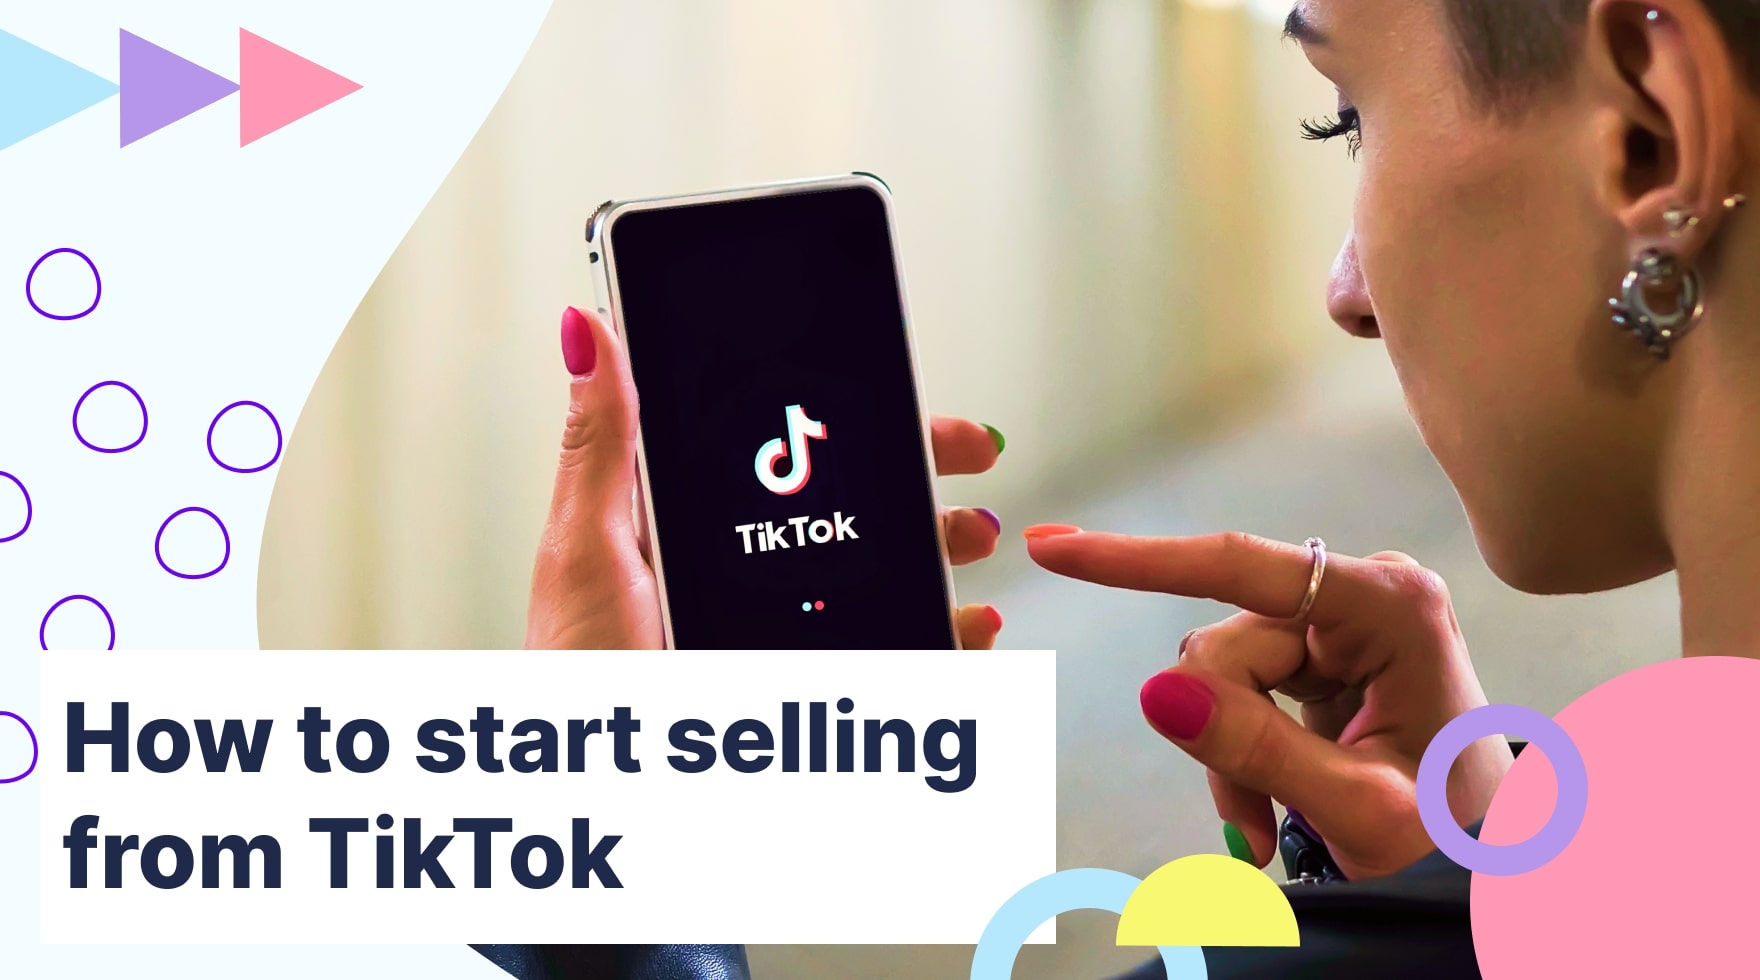 How to start selling from TikTok